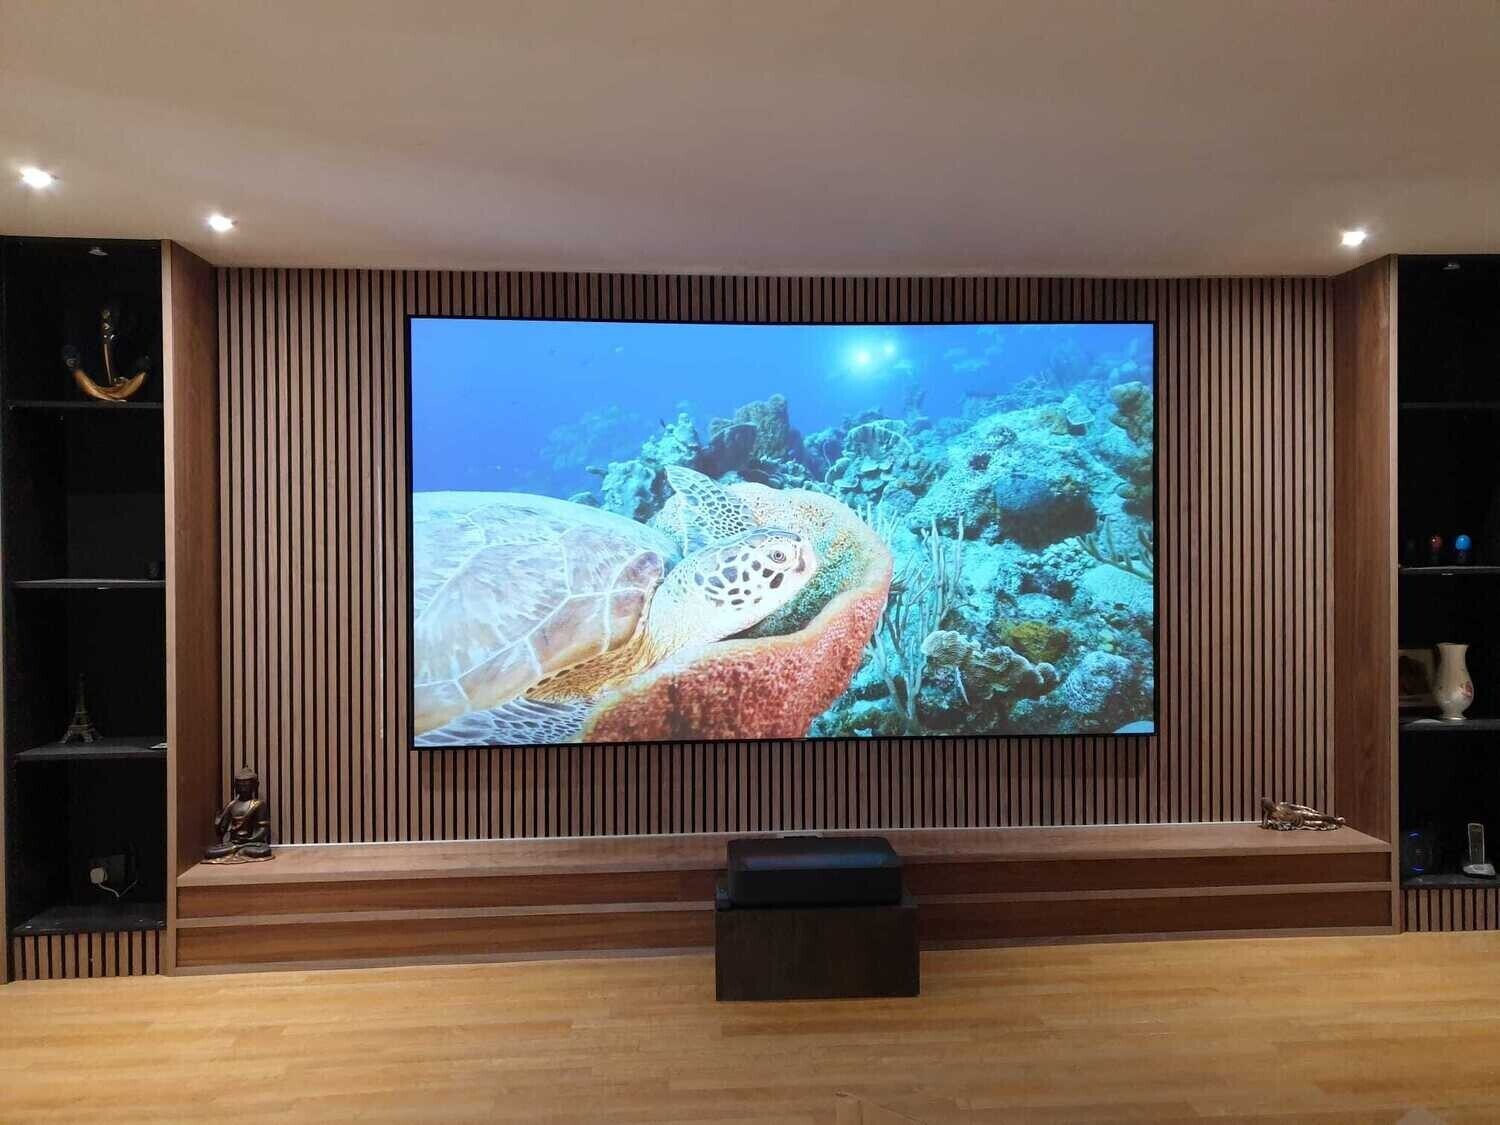 Formovie Theater 4k Triple laser UST Projector + XY Screens ALR 110" PET  Crystal Fixed Frame Screen